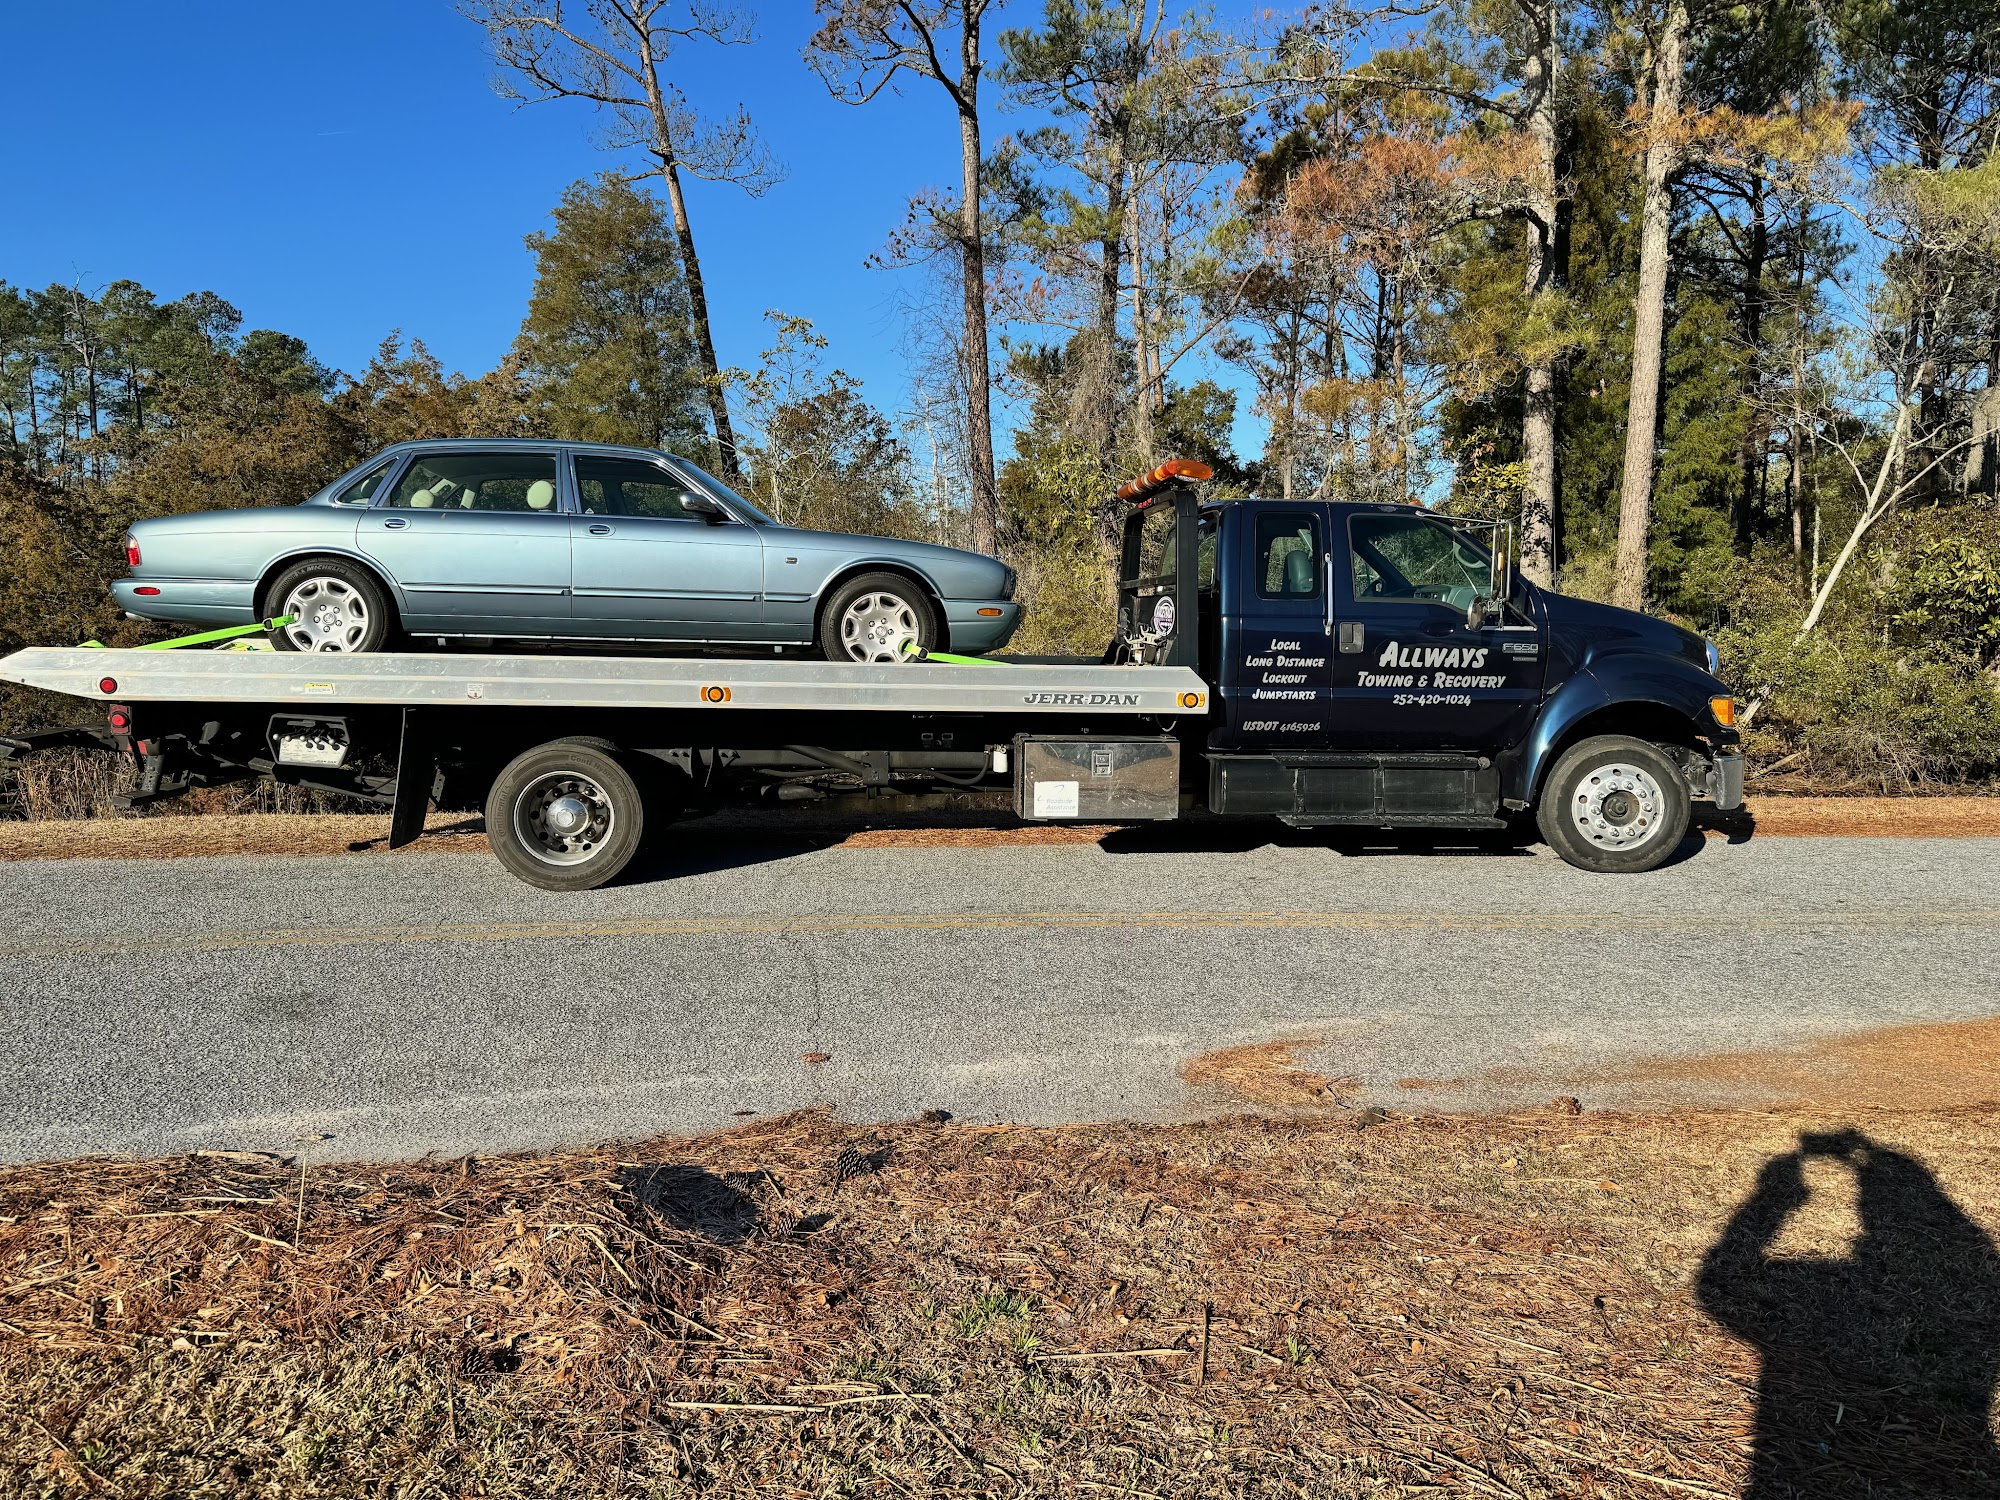 Allways Towing & Recovery LLC